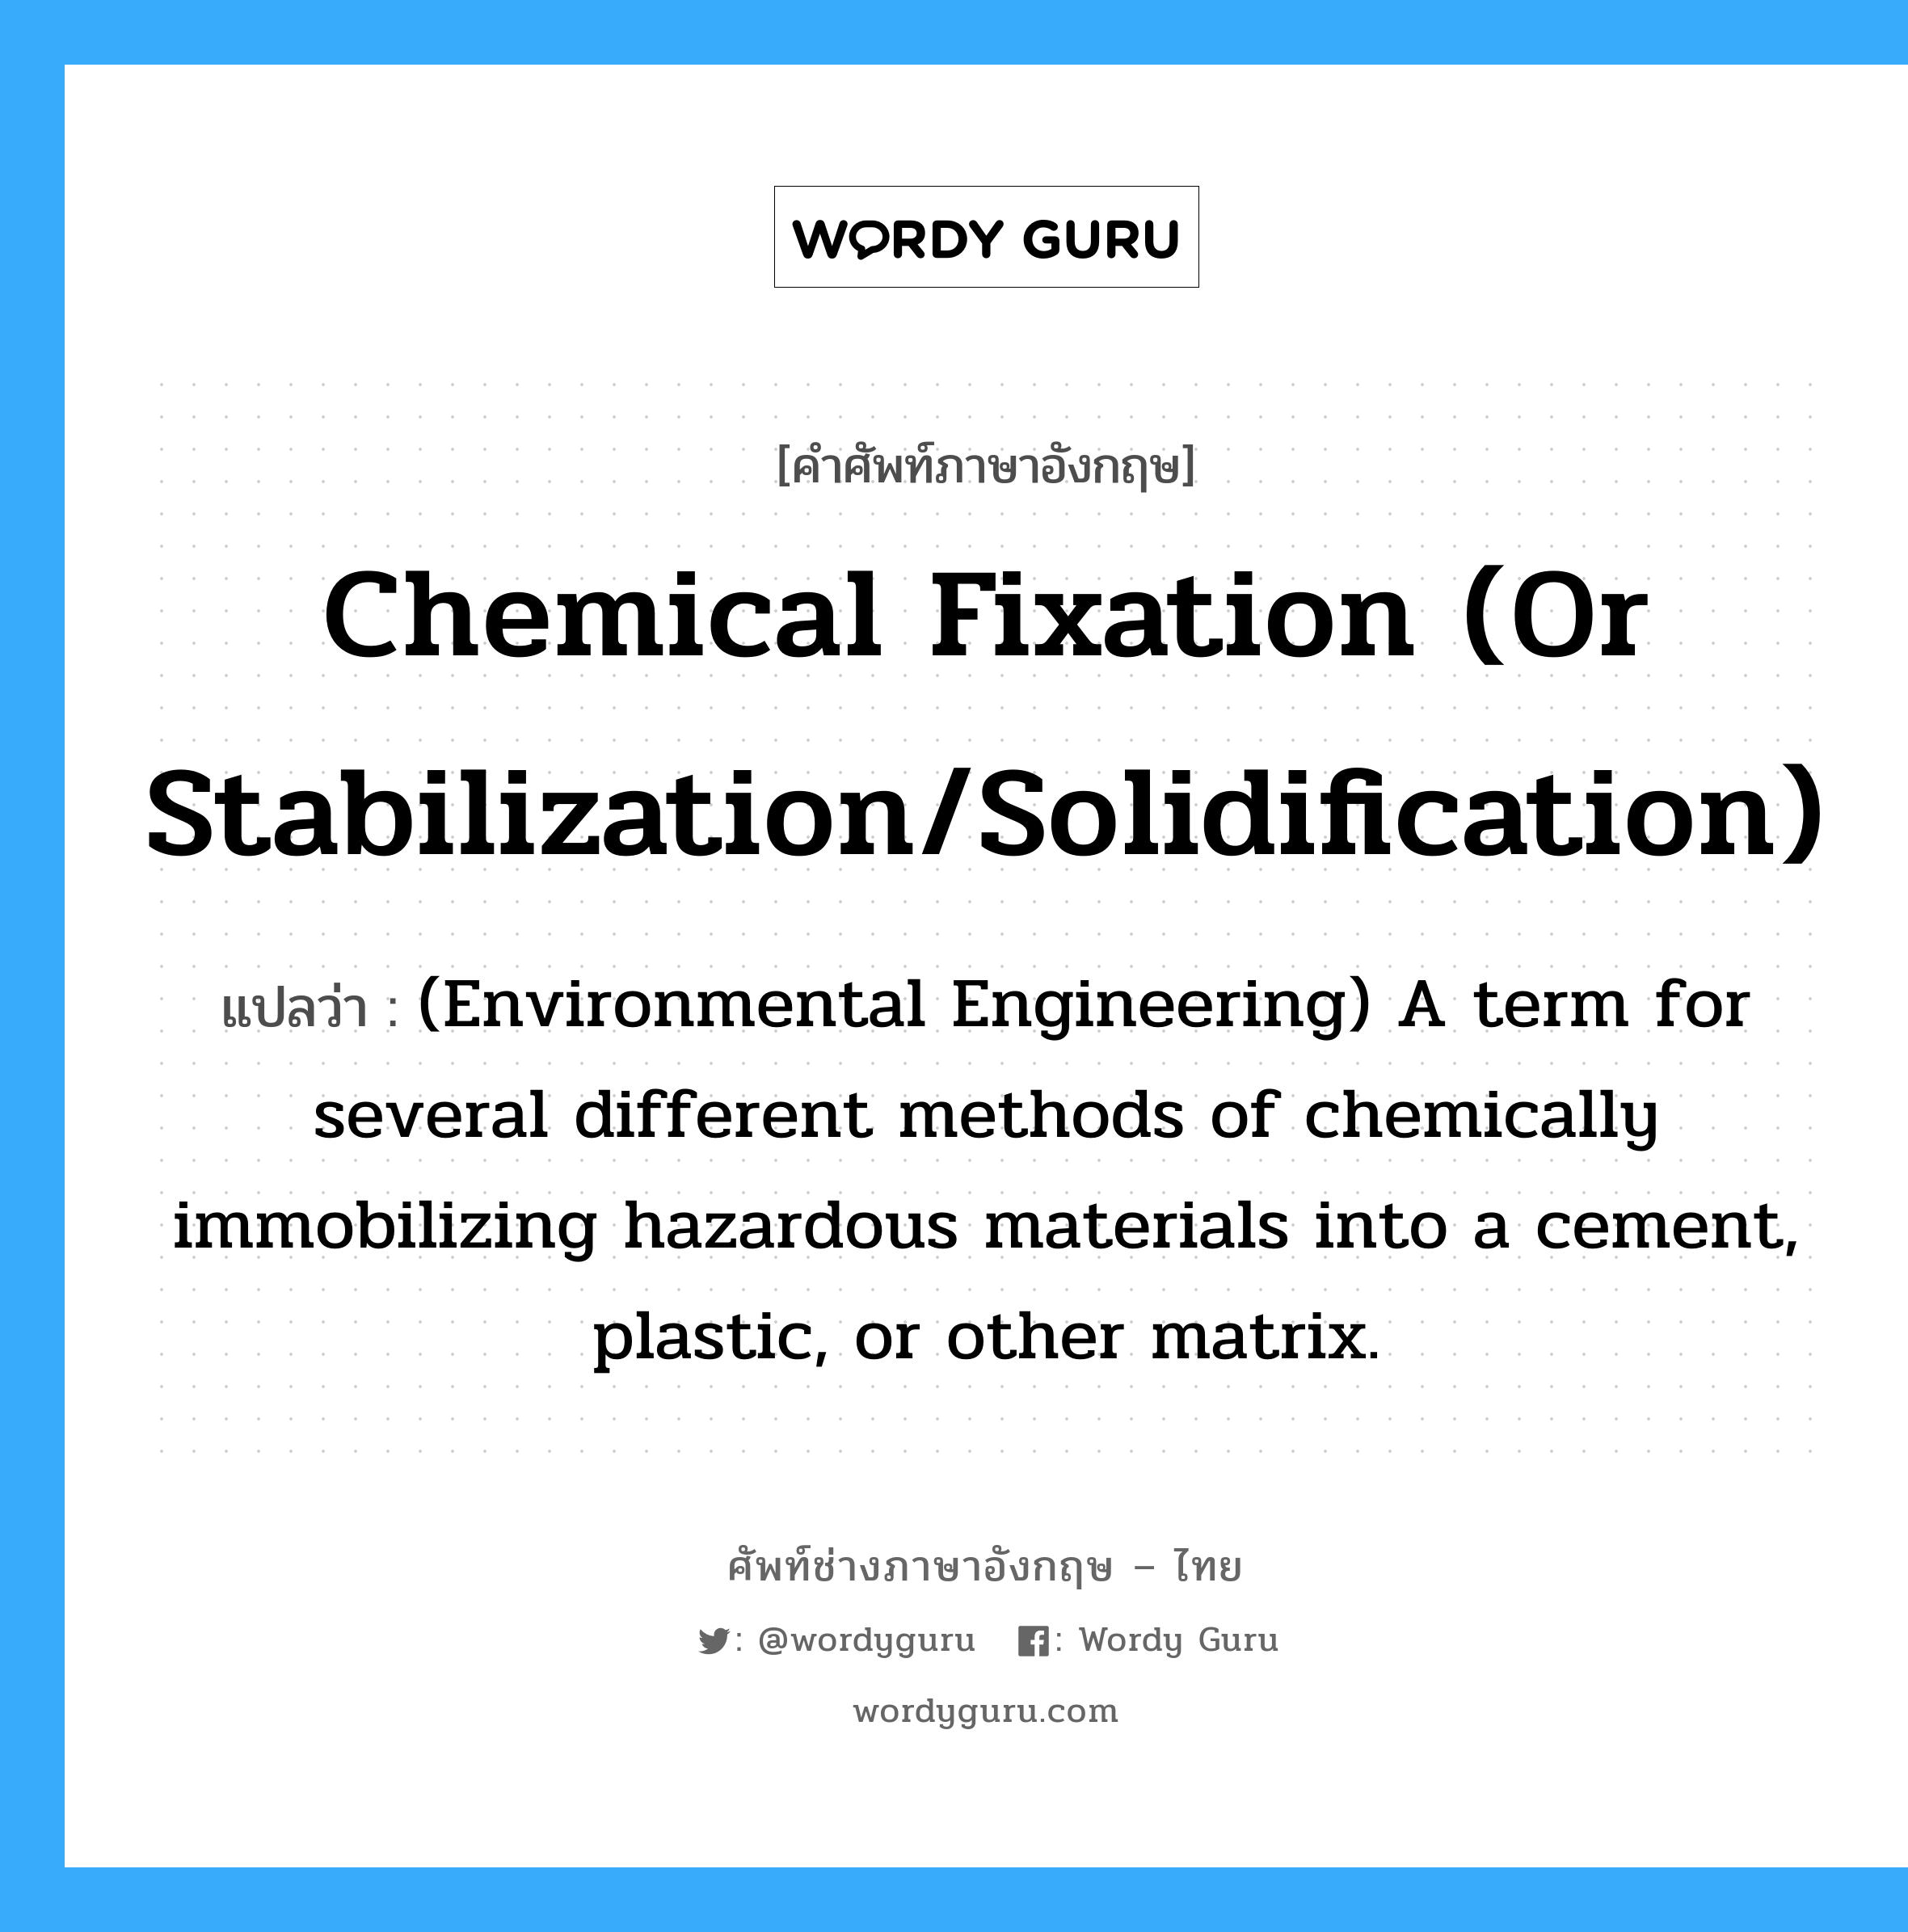 Chemical fixation (or stabilization/solidification) แปลว่า?, คำศัพท์ช่างภาษาอังกฤษ - ไทย Chemical fixation (or stabilization/solidification) คำศัพท์ภาษาอังกฤษ Chemical fixation (or stabilization/solidification) แปลว่า (Environmental Engineering) A term for several different methods of chemically immobilizing hazardous materials into a cement, plastic, or other matrix.